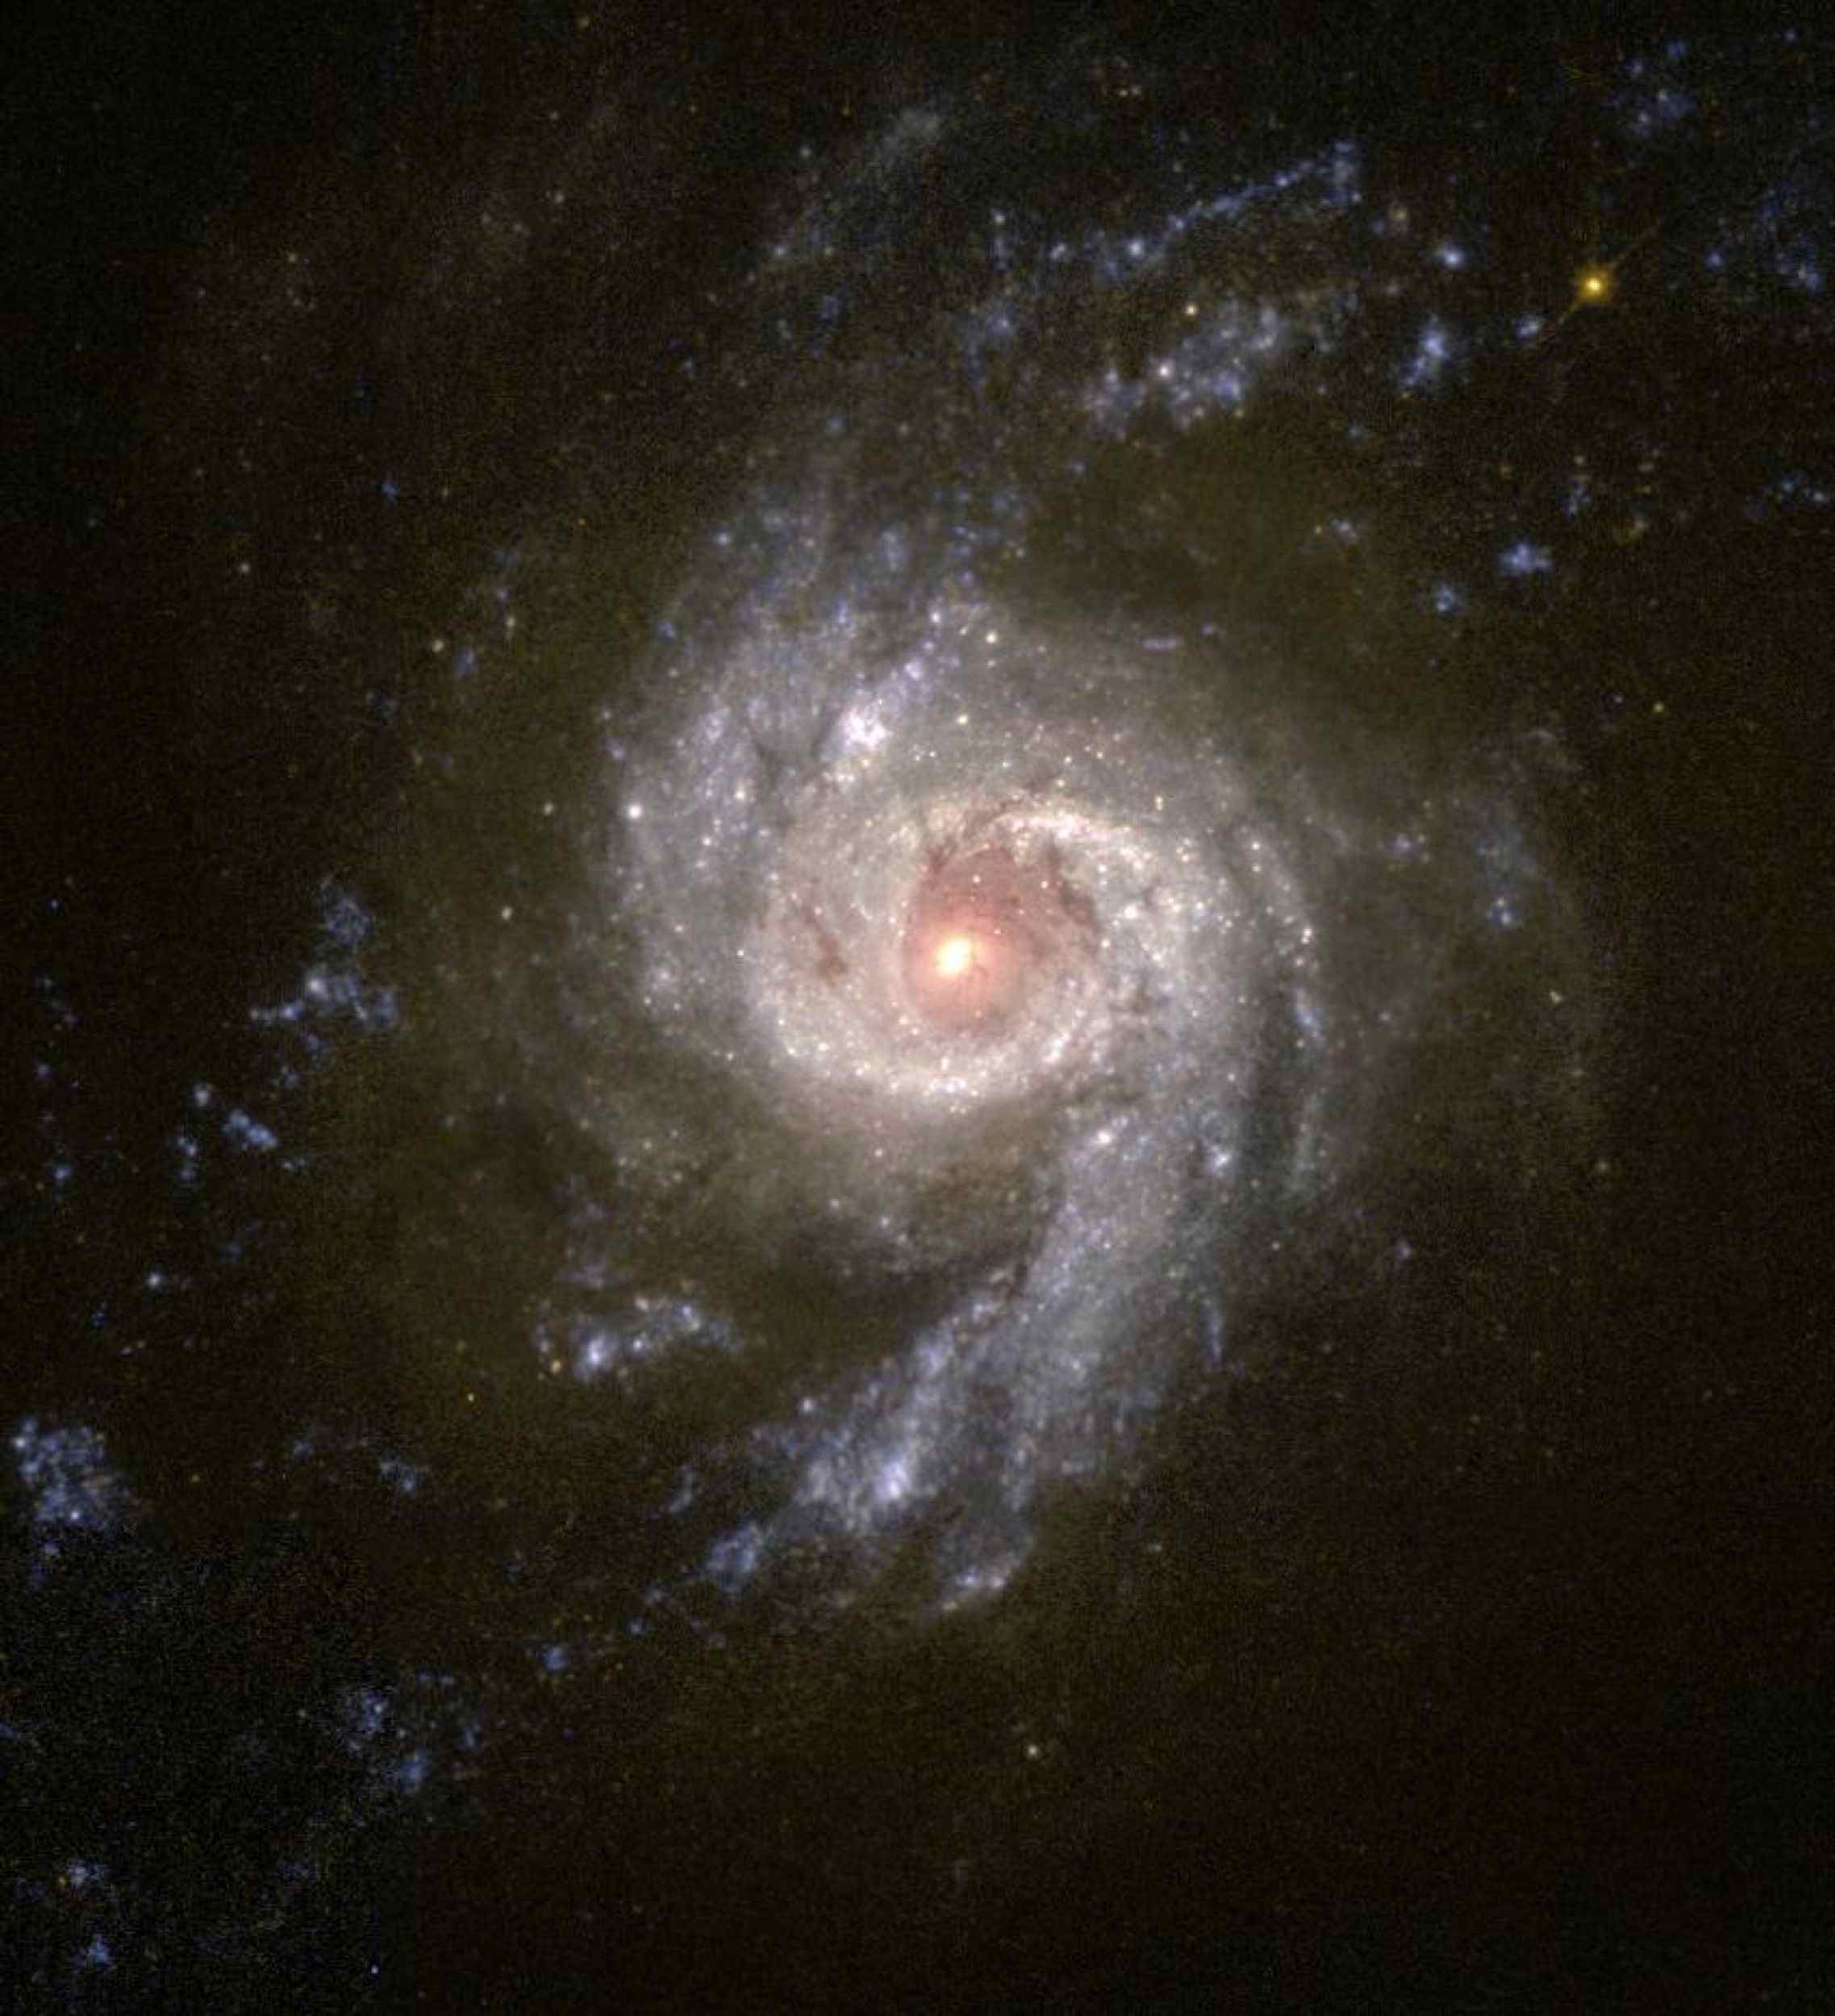 Scientists using NASA's Hubble Space Telescope are studying the colors of star clusters to determine the age and history of starburst galaxies, a technique somewhat similar to the process of learning the age of a tree by counting its rings.